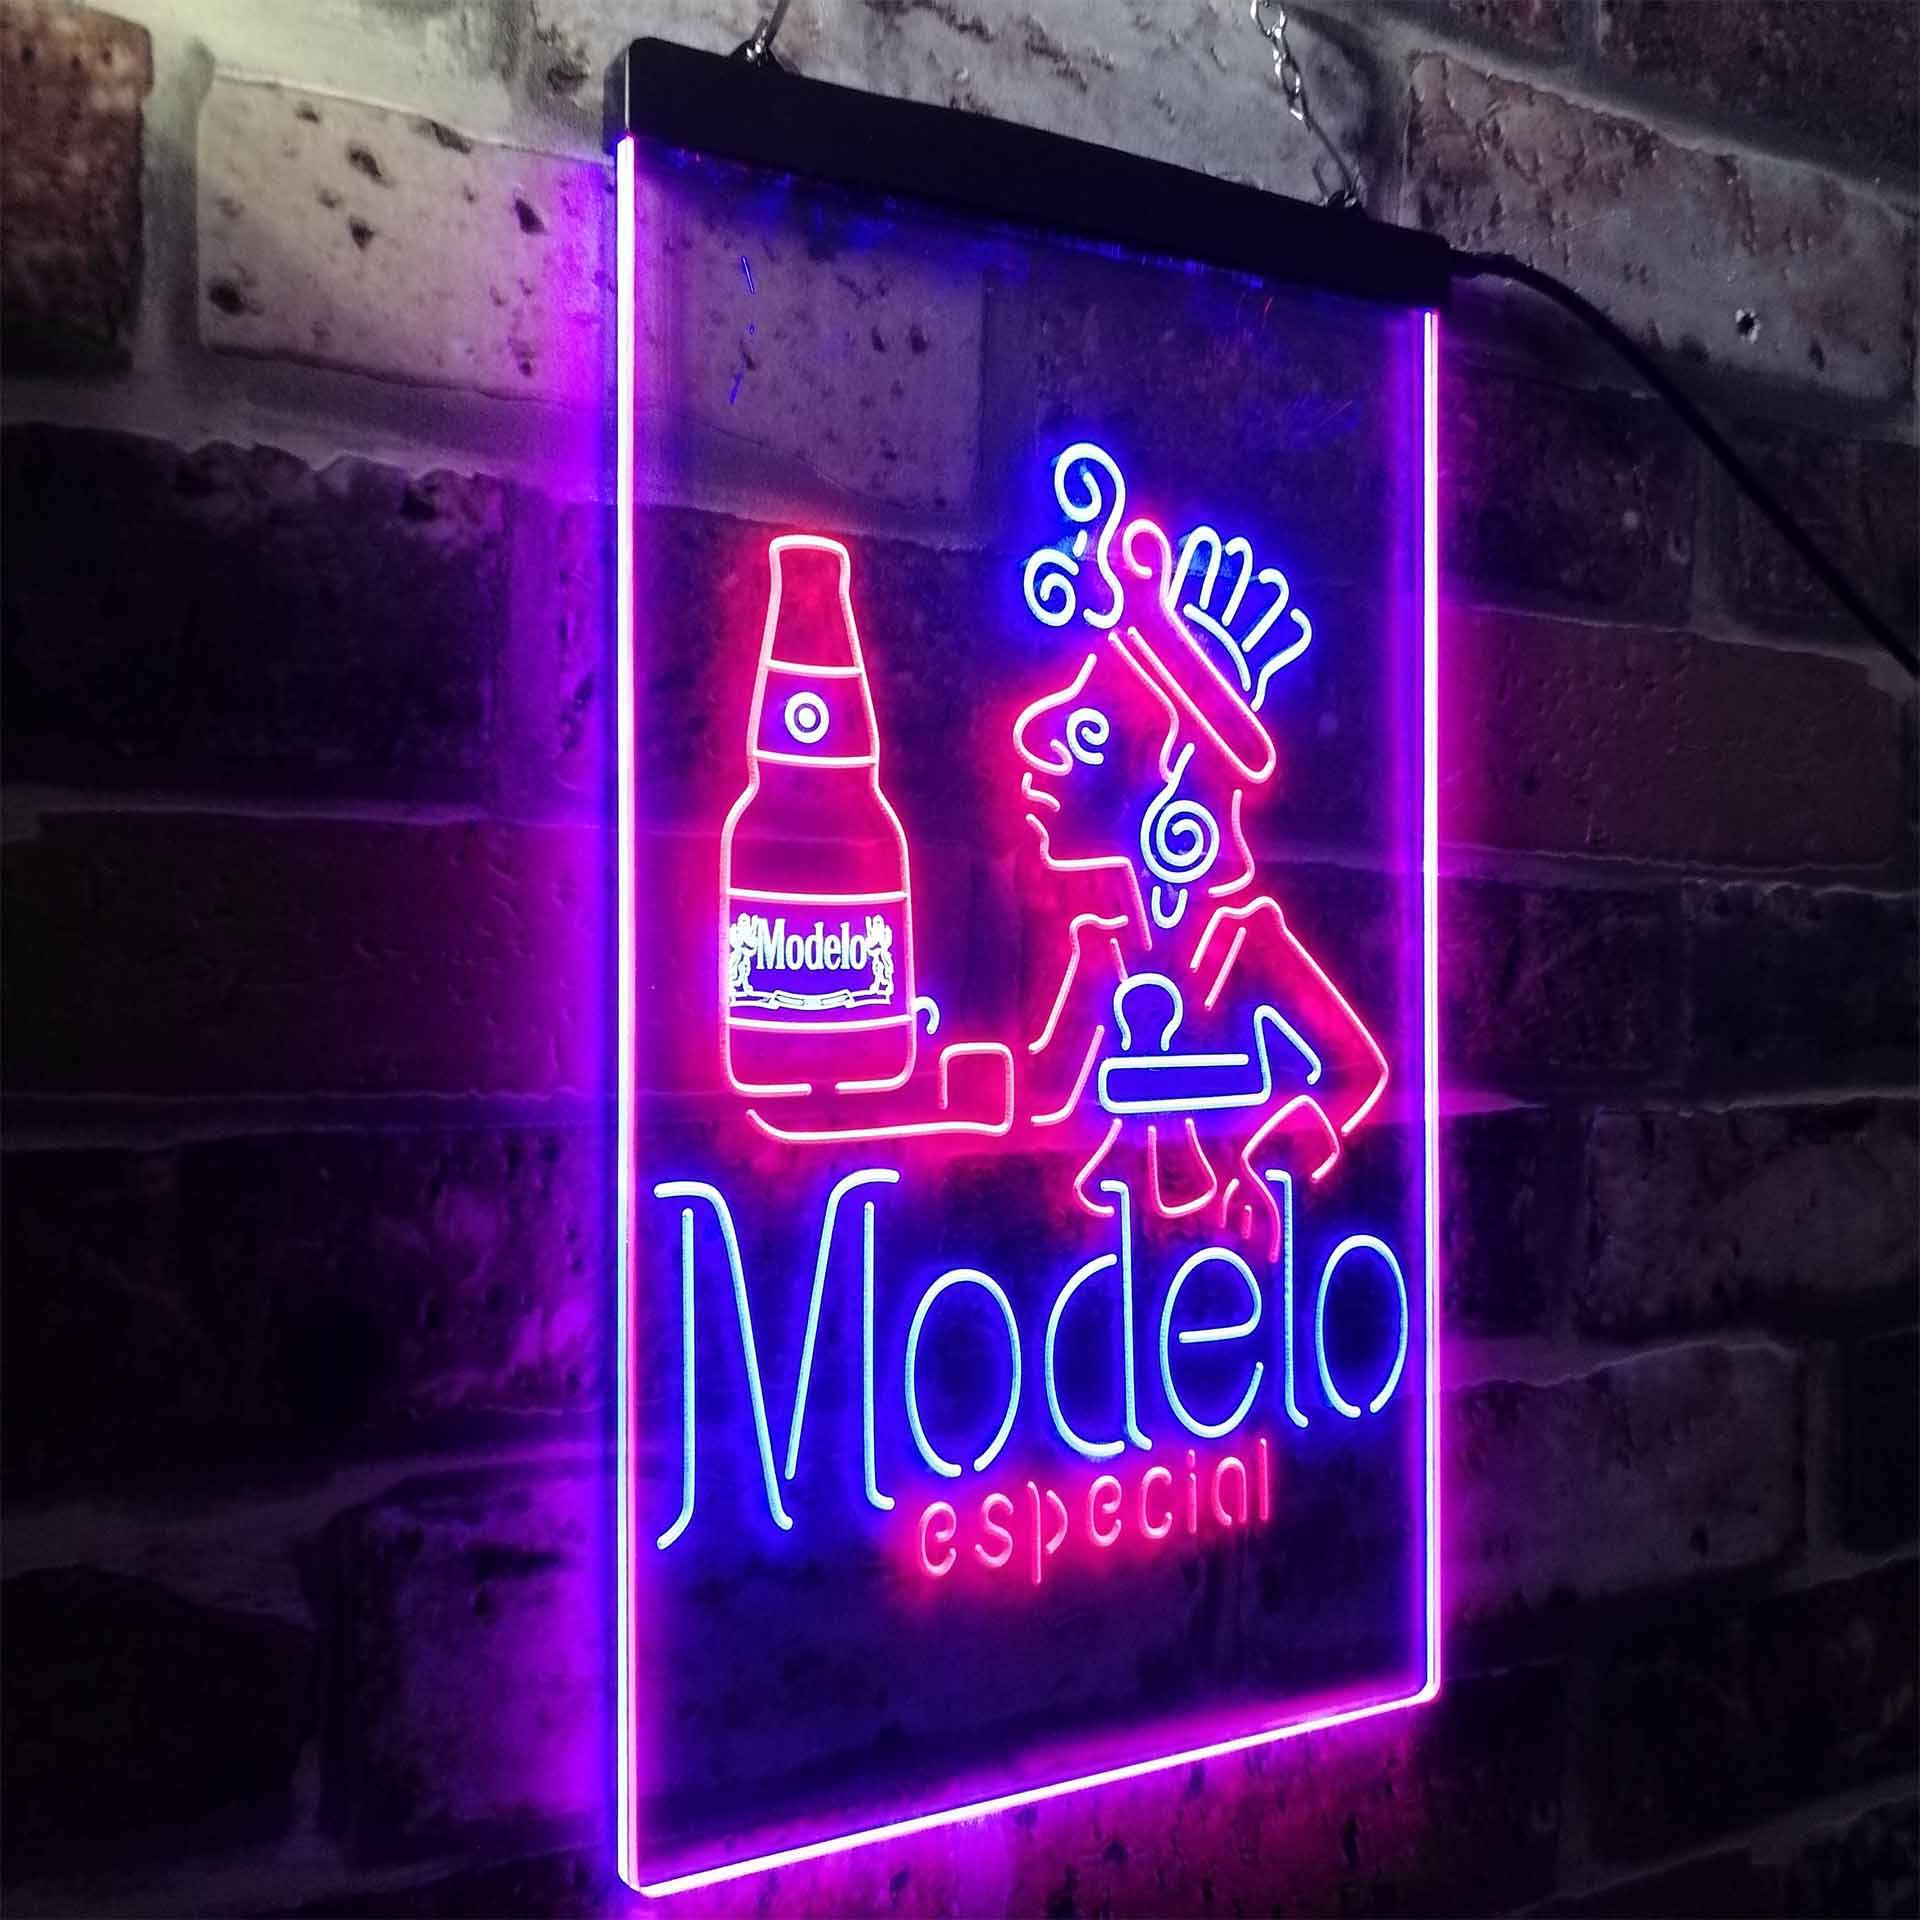 Modelo Especial Adjunct Lager Man Cave LED Neon Sign